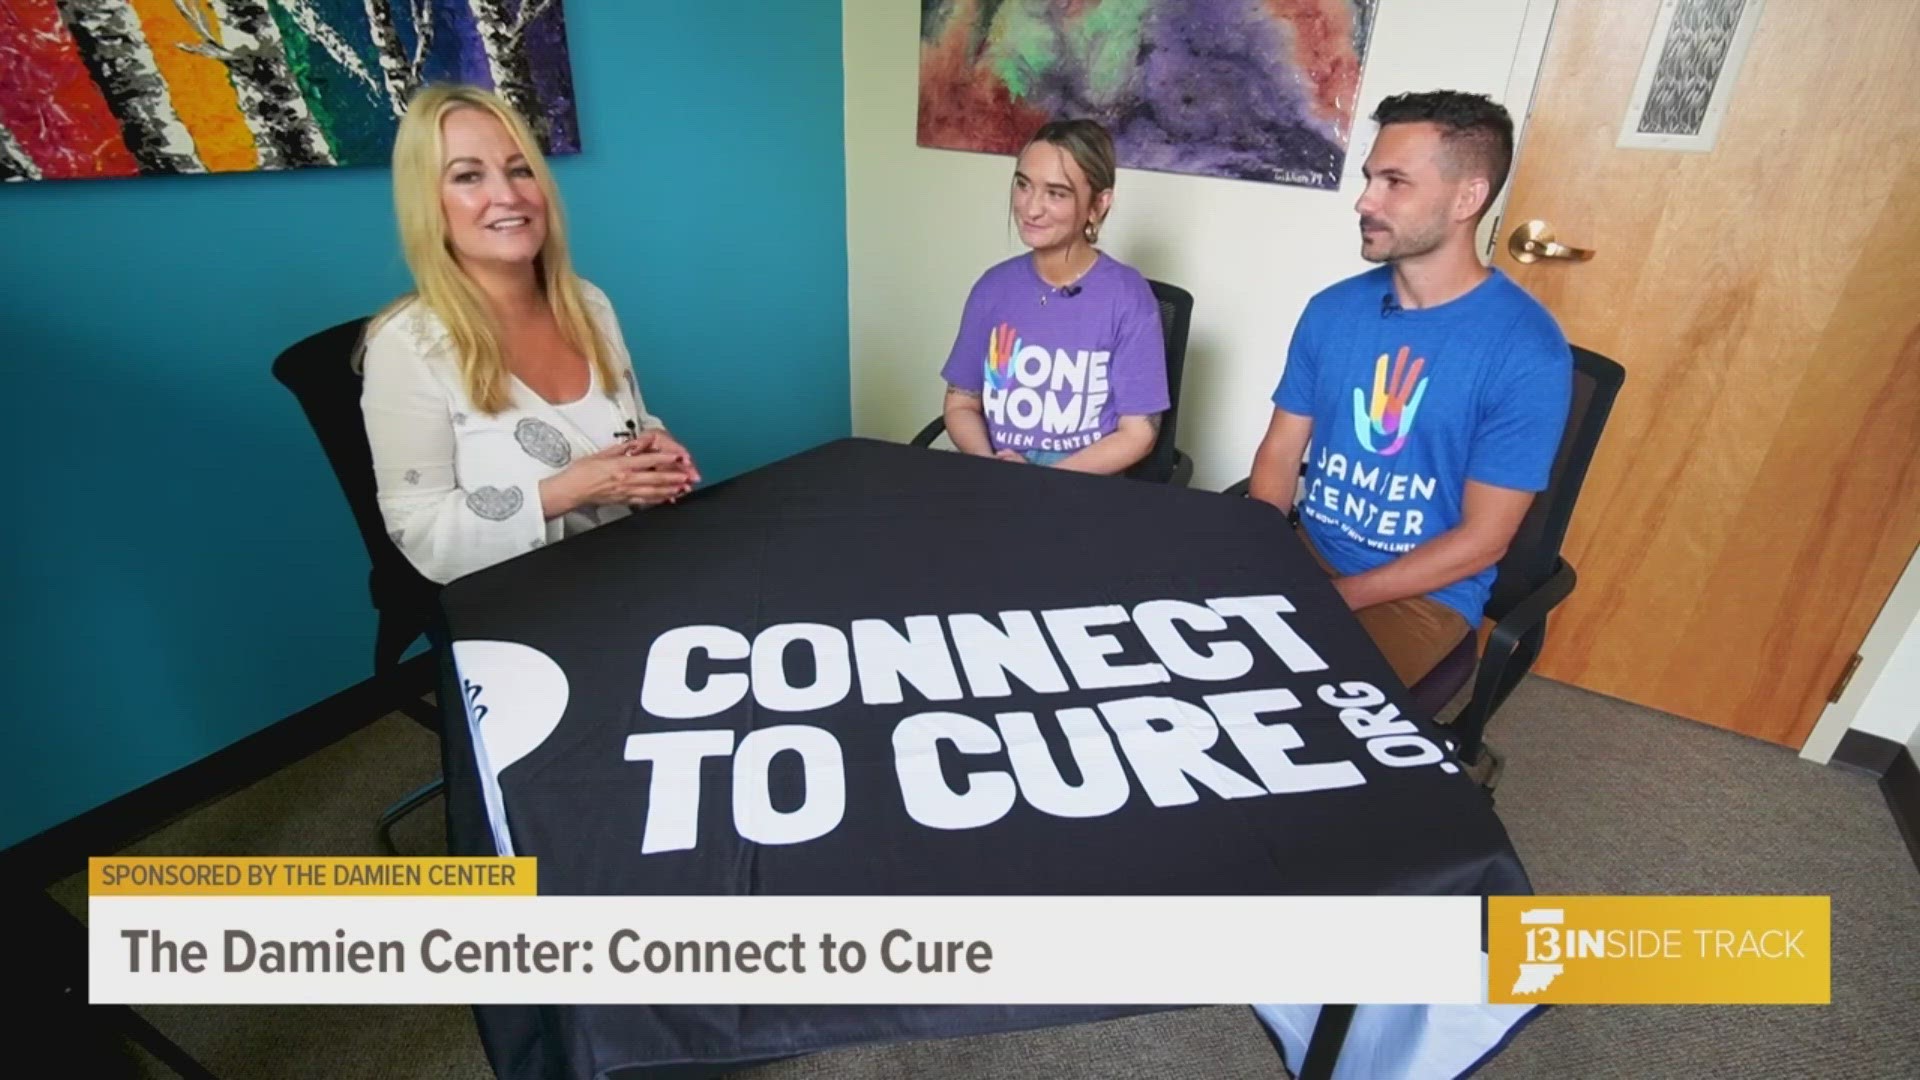 See how easy it is to get tested for Hepatitis C, as well as the latest advancements in treatments. Learn about Damien Center's Connect to Cure program in Indiana.